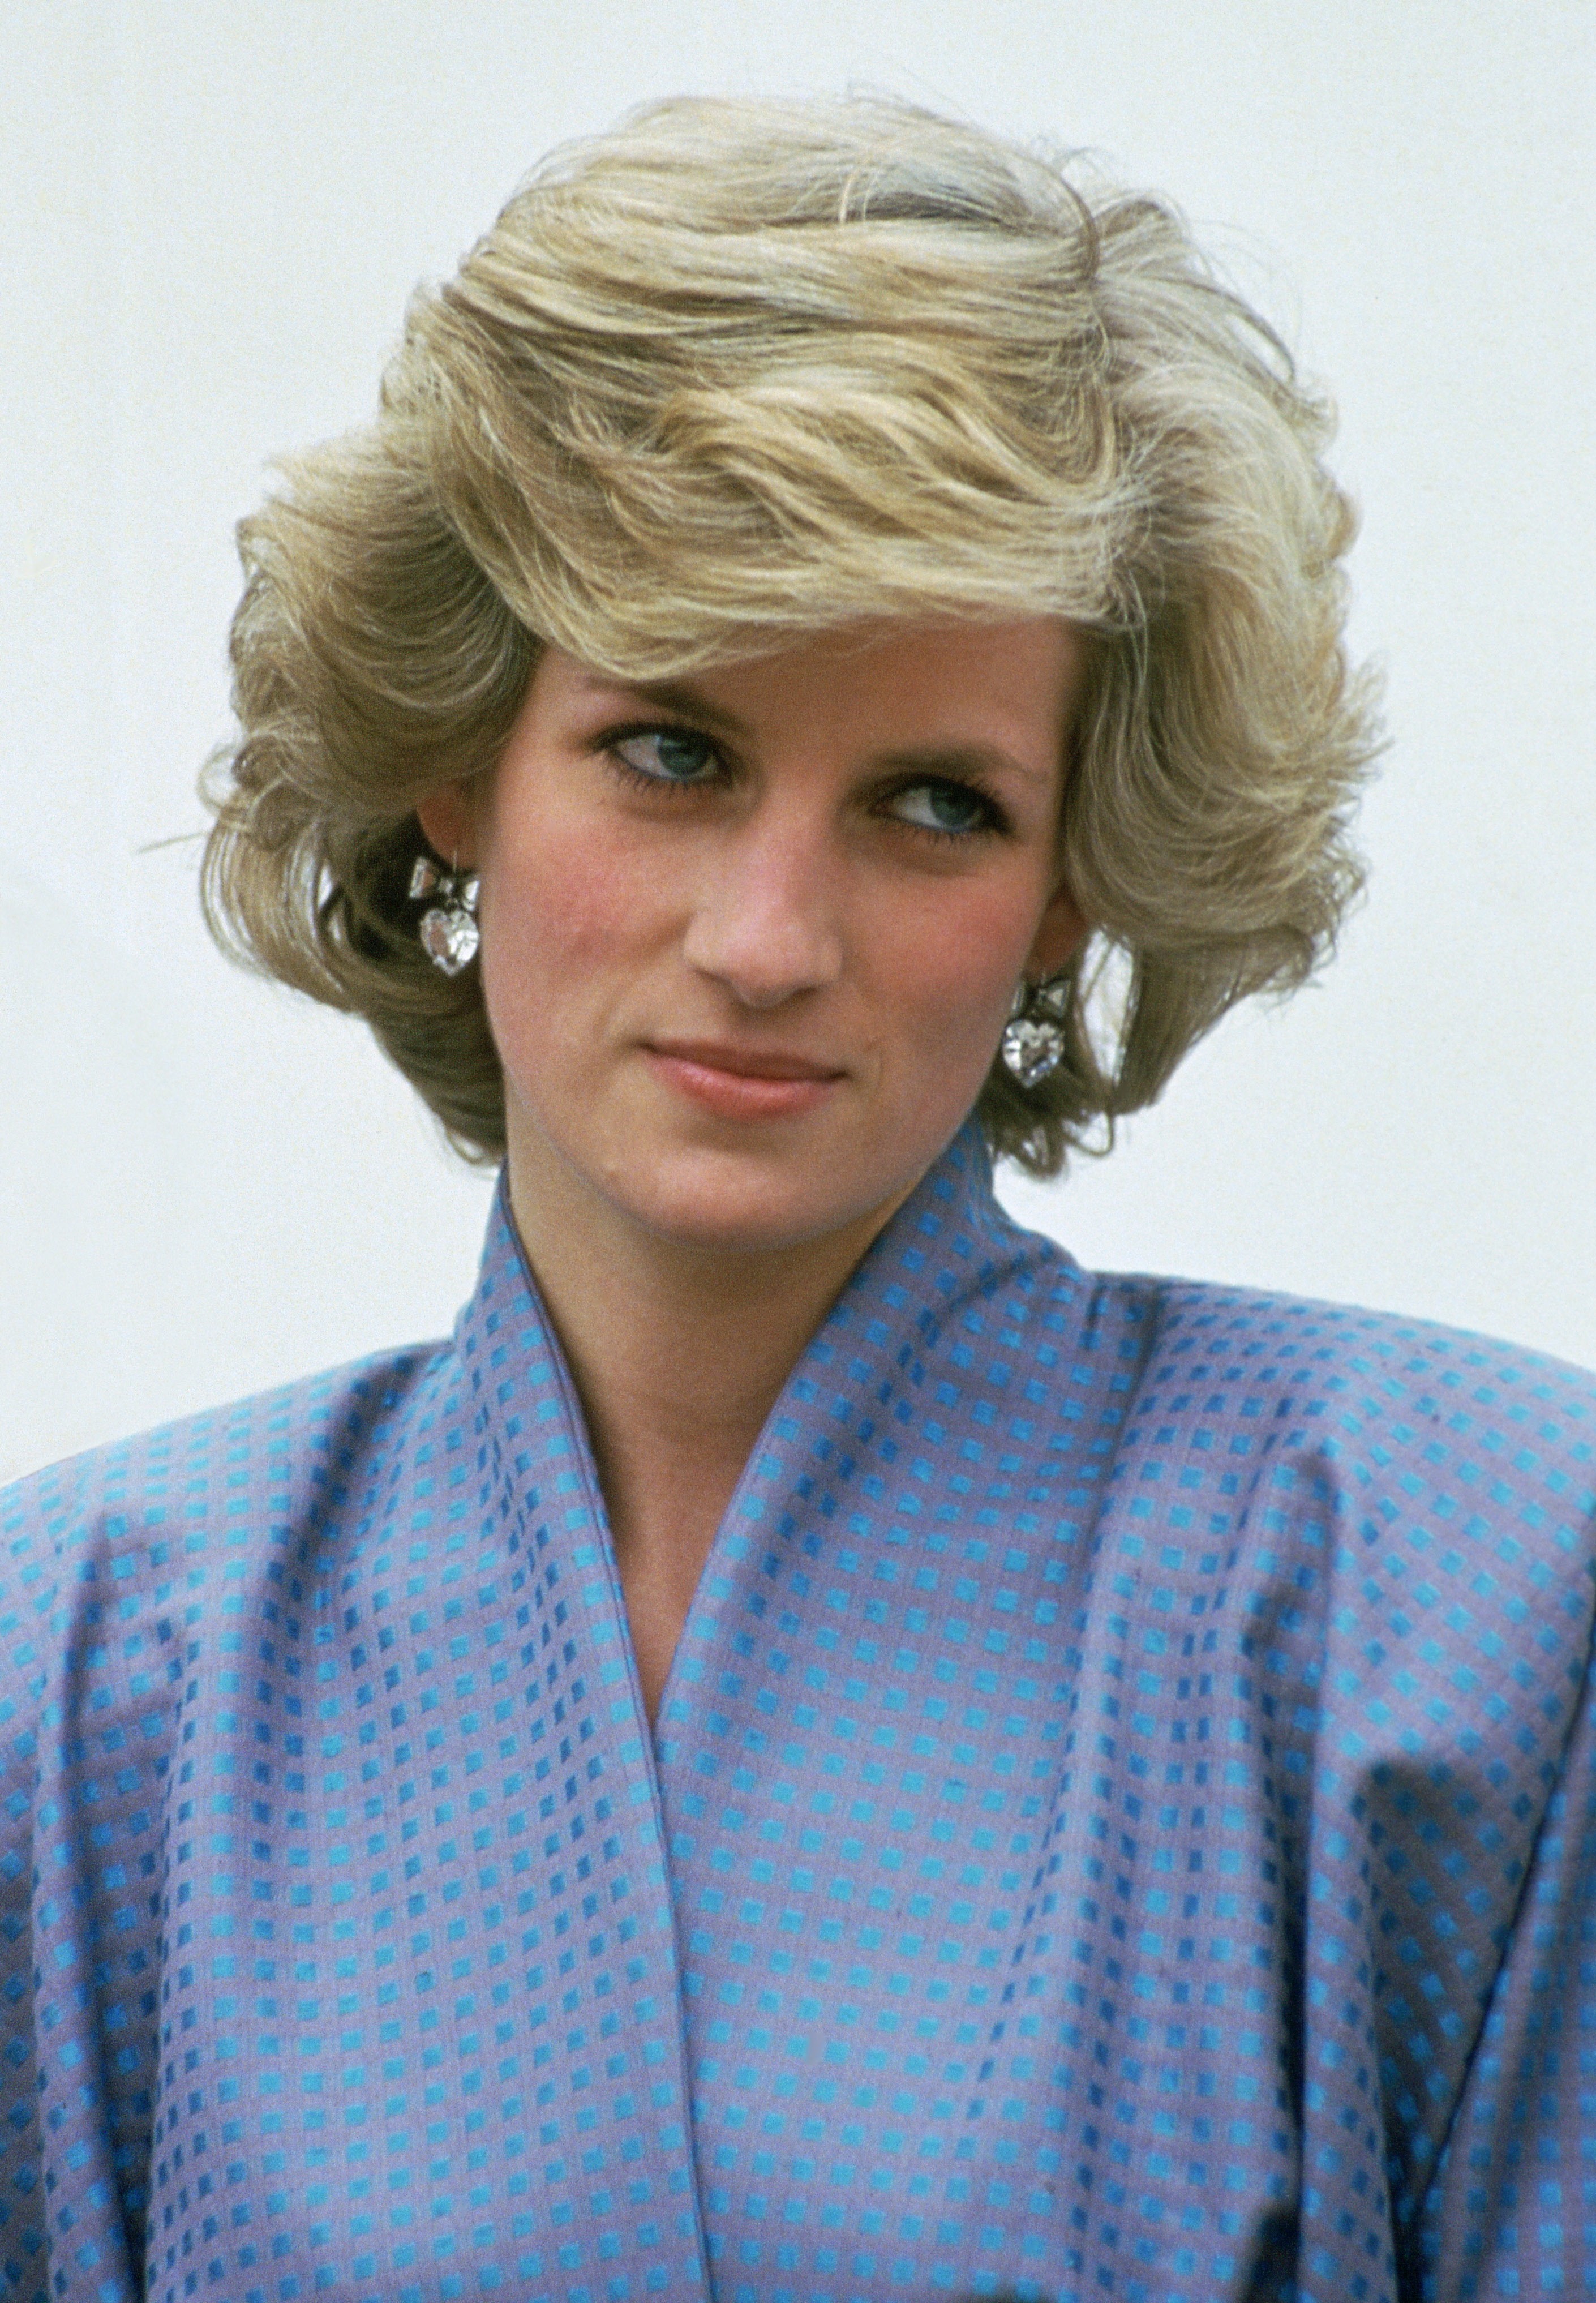 ITALY - APRIL 22:  Diana, Princess Of Wales, Wearing A Silk Suit Designed By Fashion Designer Bruce Oldfield, During An Official Overseas Visit. Diana's Crystal Heart Earrings Are By Jewellers Butler And Wilson.  (Photo by Tim Graham Photo Library via Get (Foto: Tim Graham Photo Library via Get)